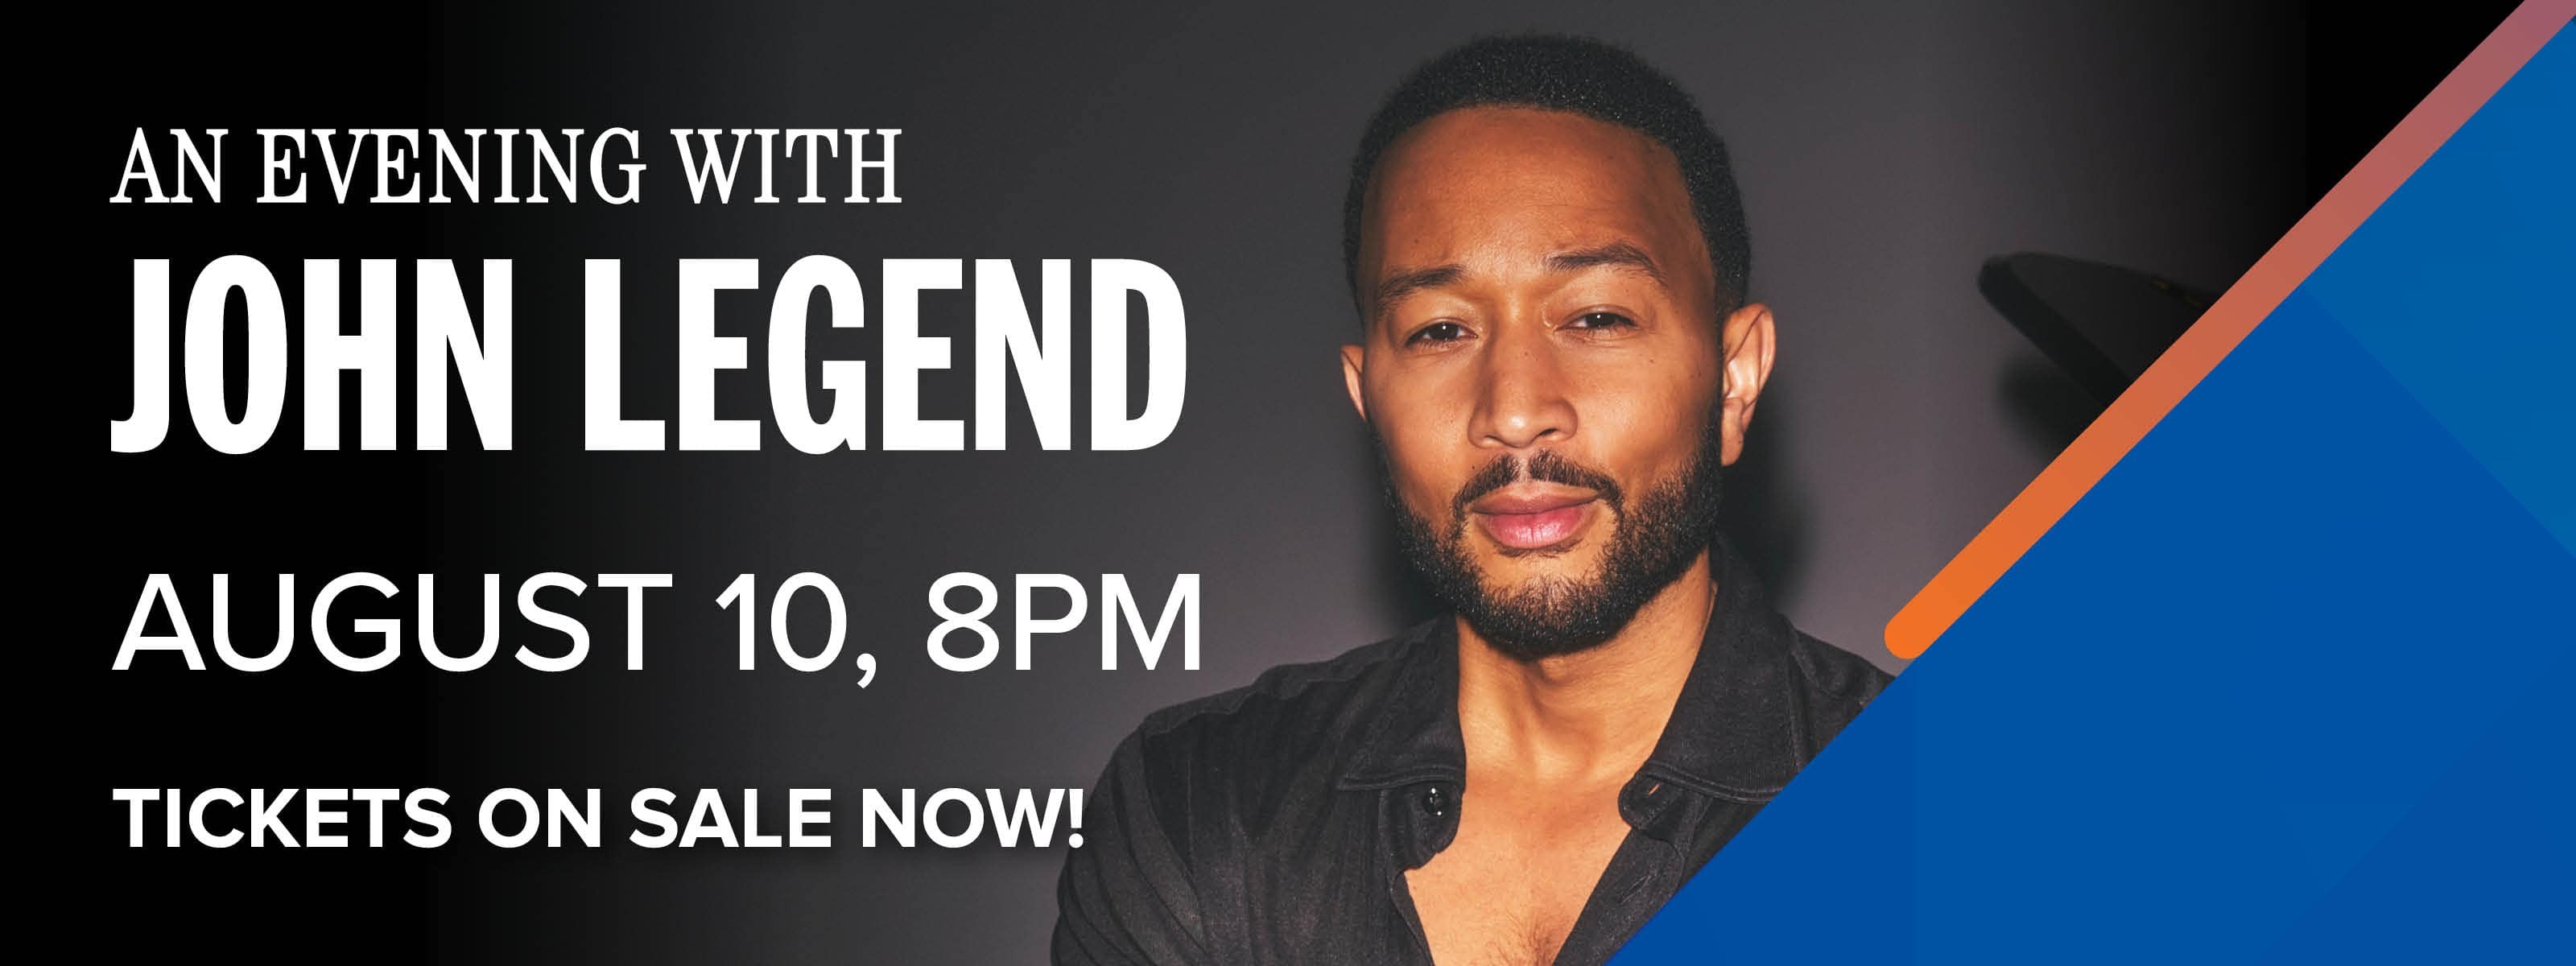 An Evening with John Legend August 10 at 8PM Tickets On Sale Now